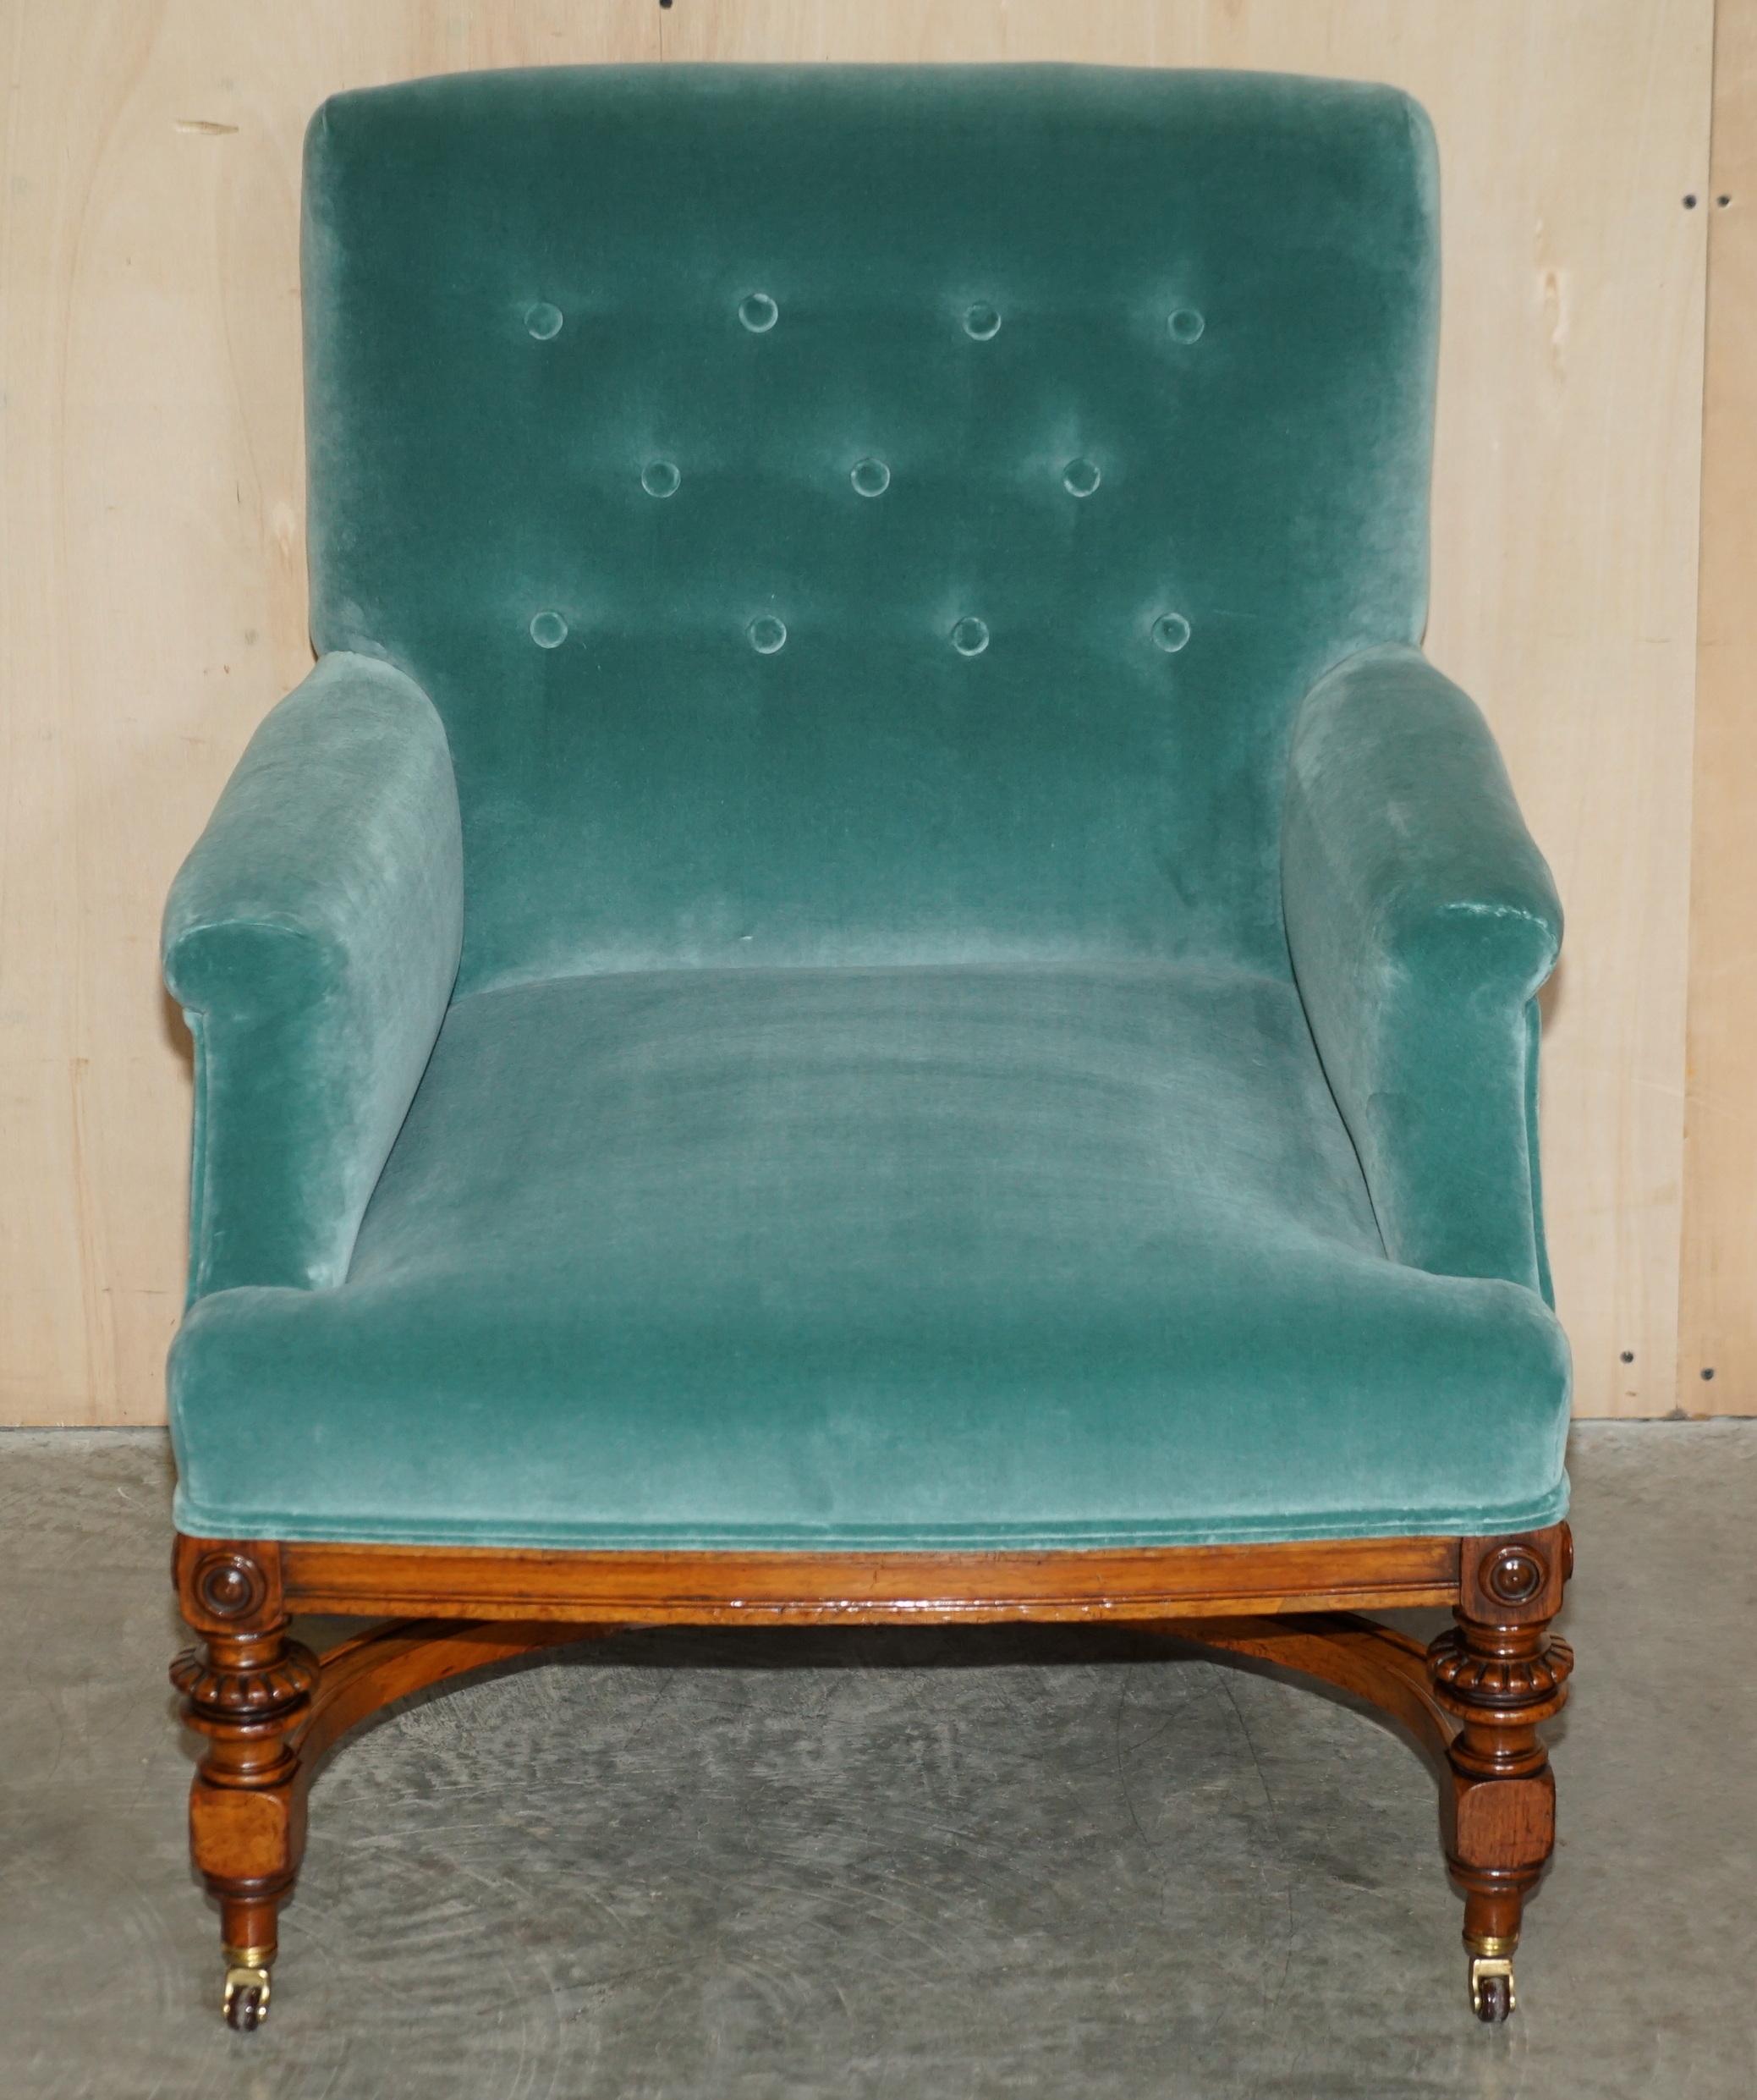 Royal House Antiques

Royal House Antiques is delighted to offer for sale this super rare, fully restored William & Mary style, Antique Victorian Chesterfield armchair upholstered with Mulberry aqua green velvet upholstery

Please note the delivery